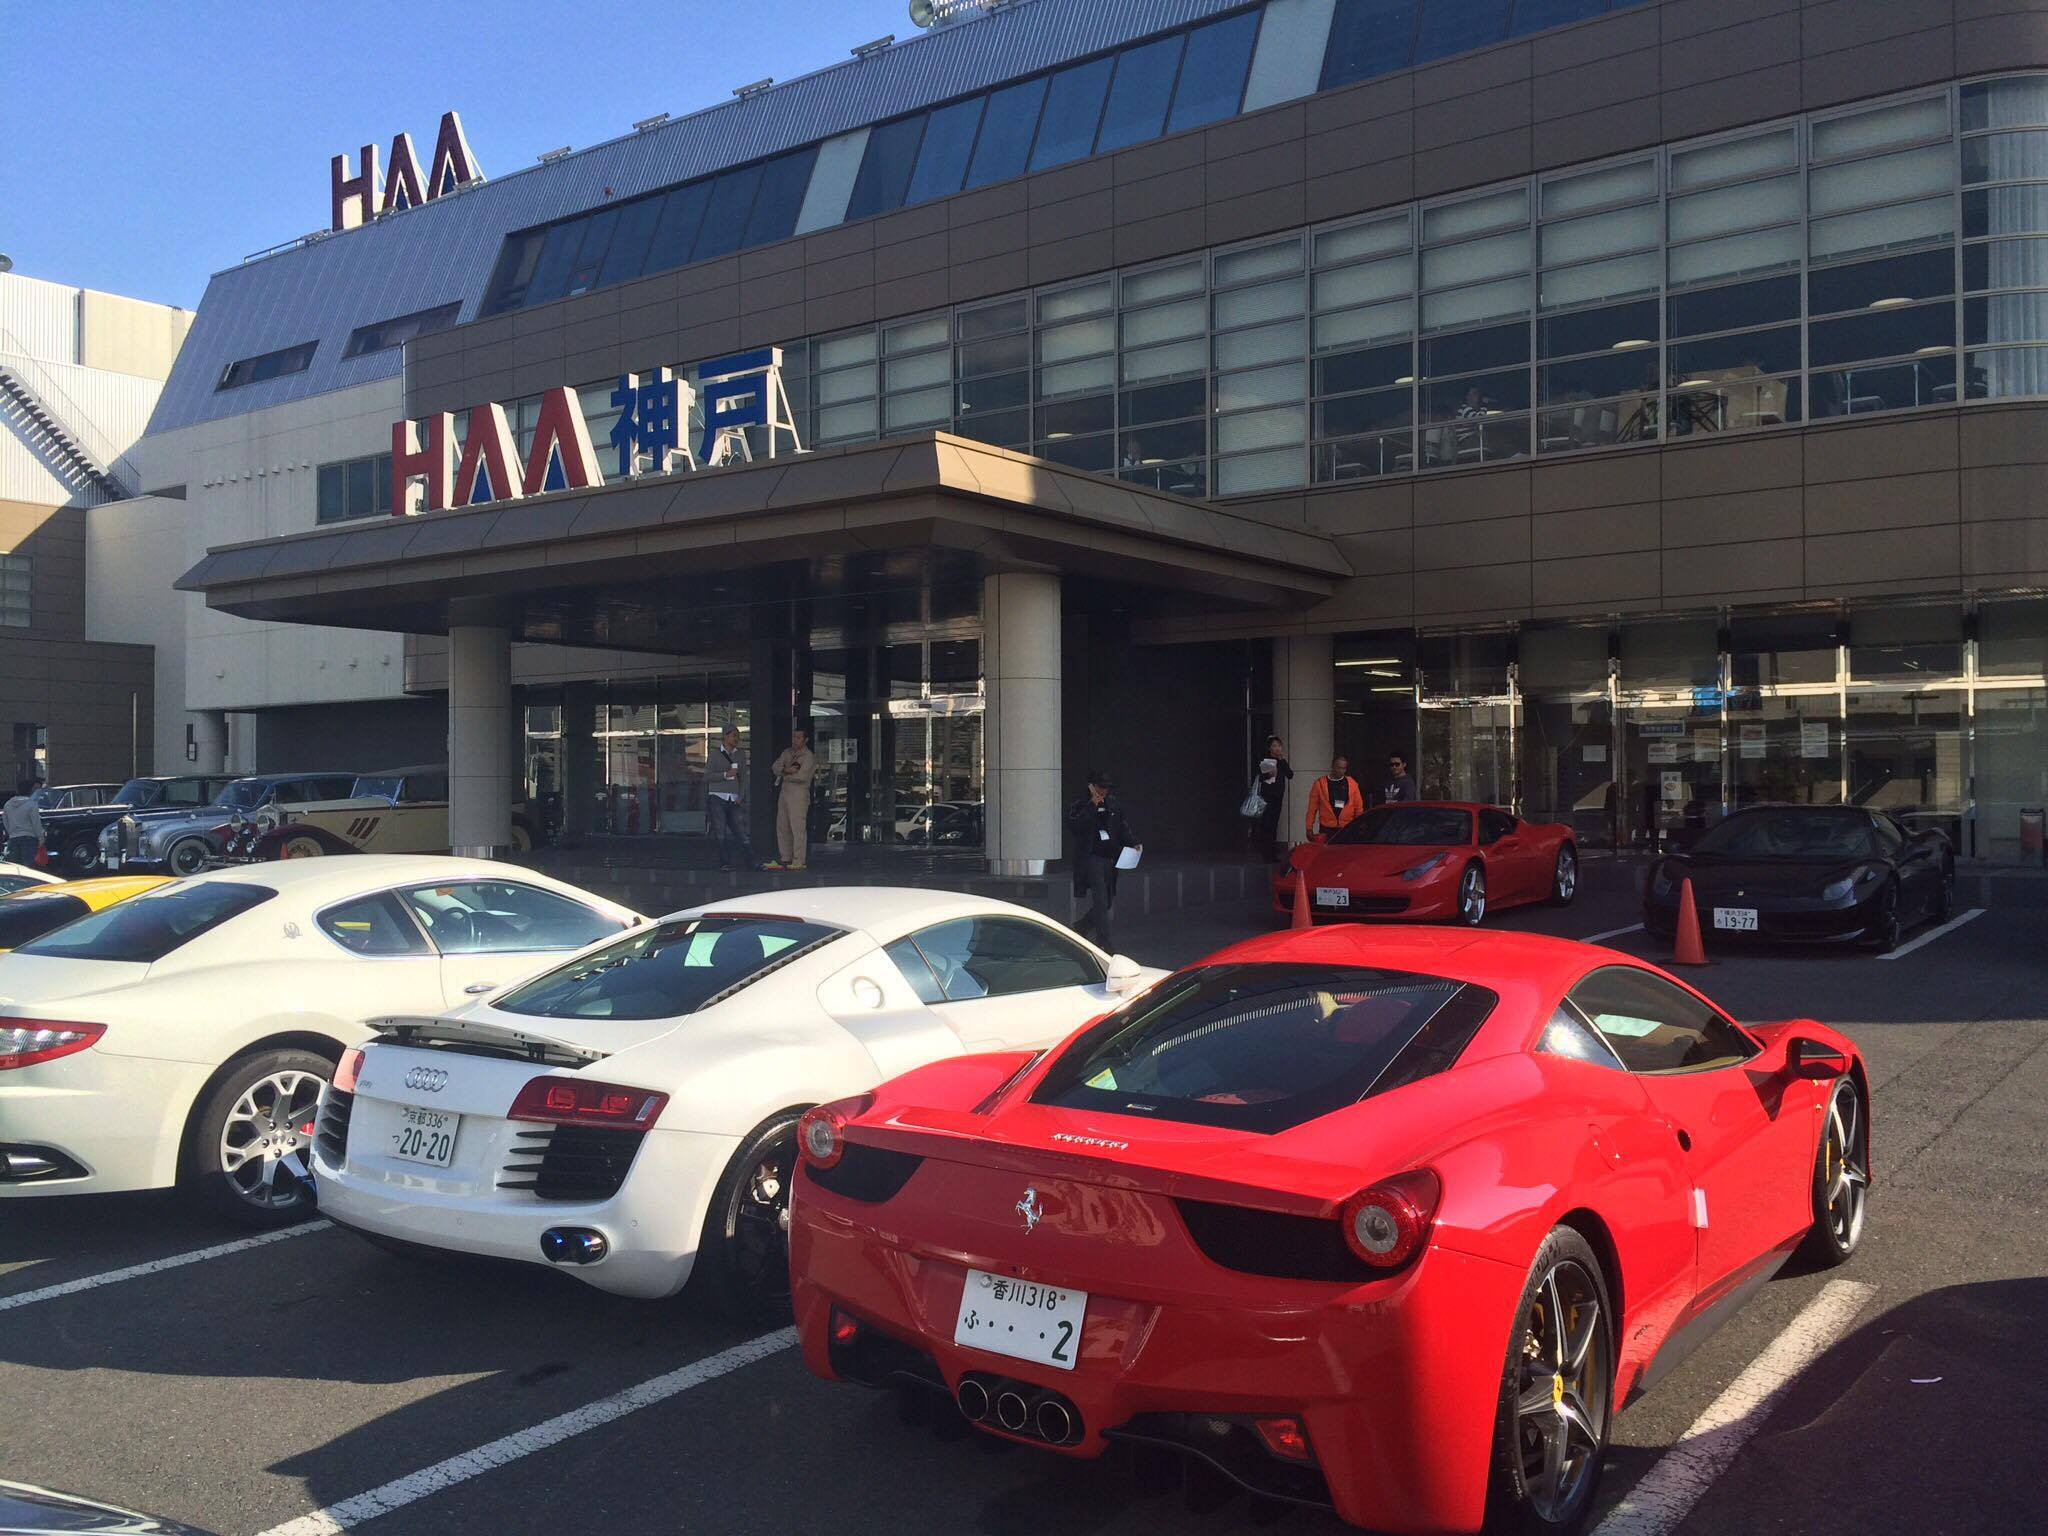 HAA Kobe auction house entrance. All the good stuff is parked out the front.